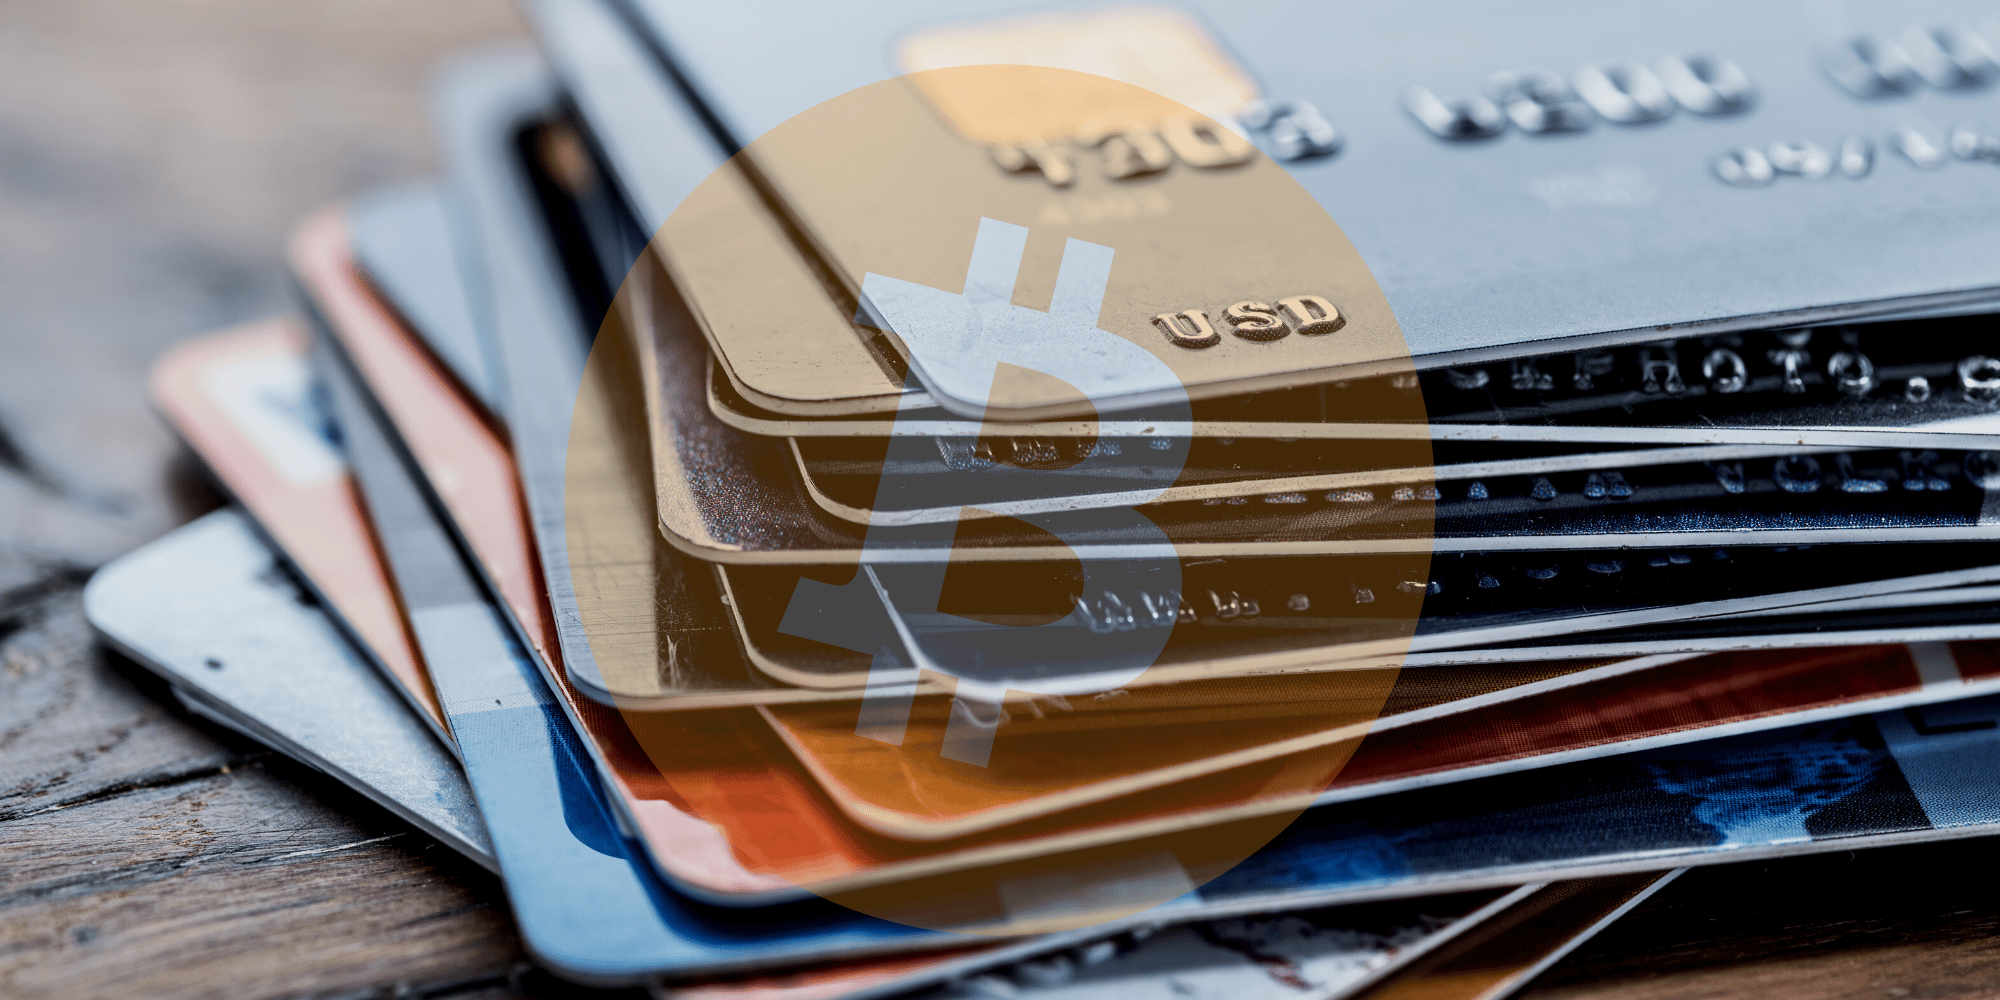 We Searched for the Best Crypto Credit Cards in 2022 So You Don’t Have To